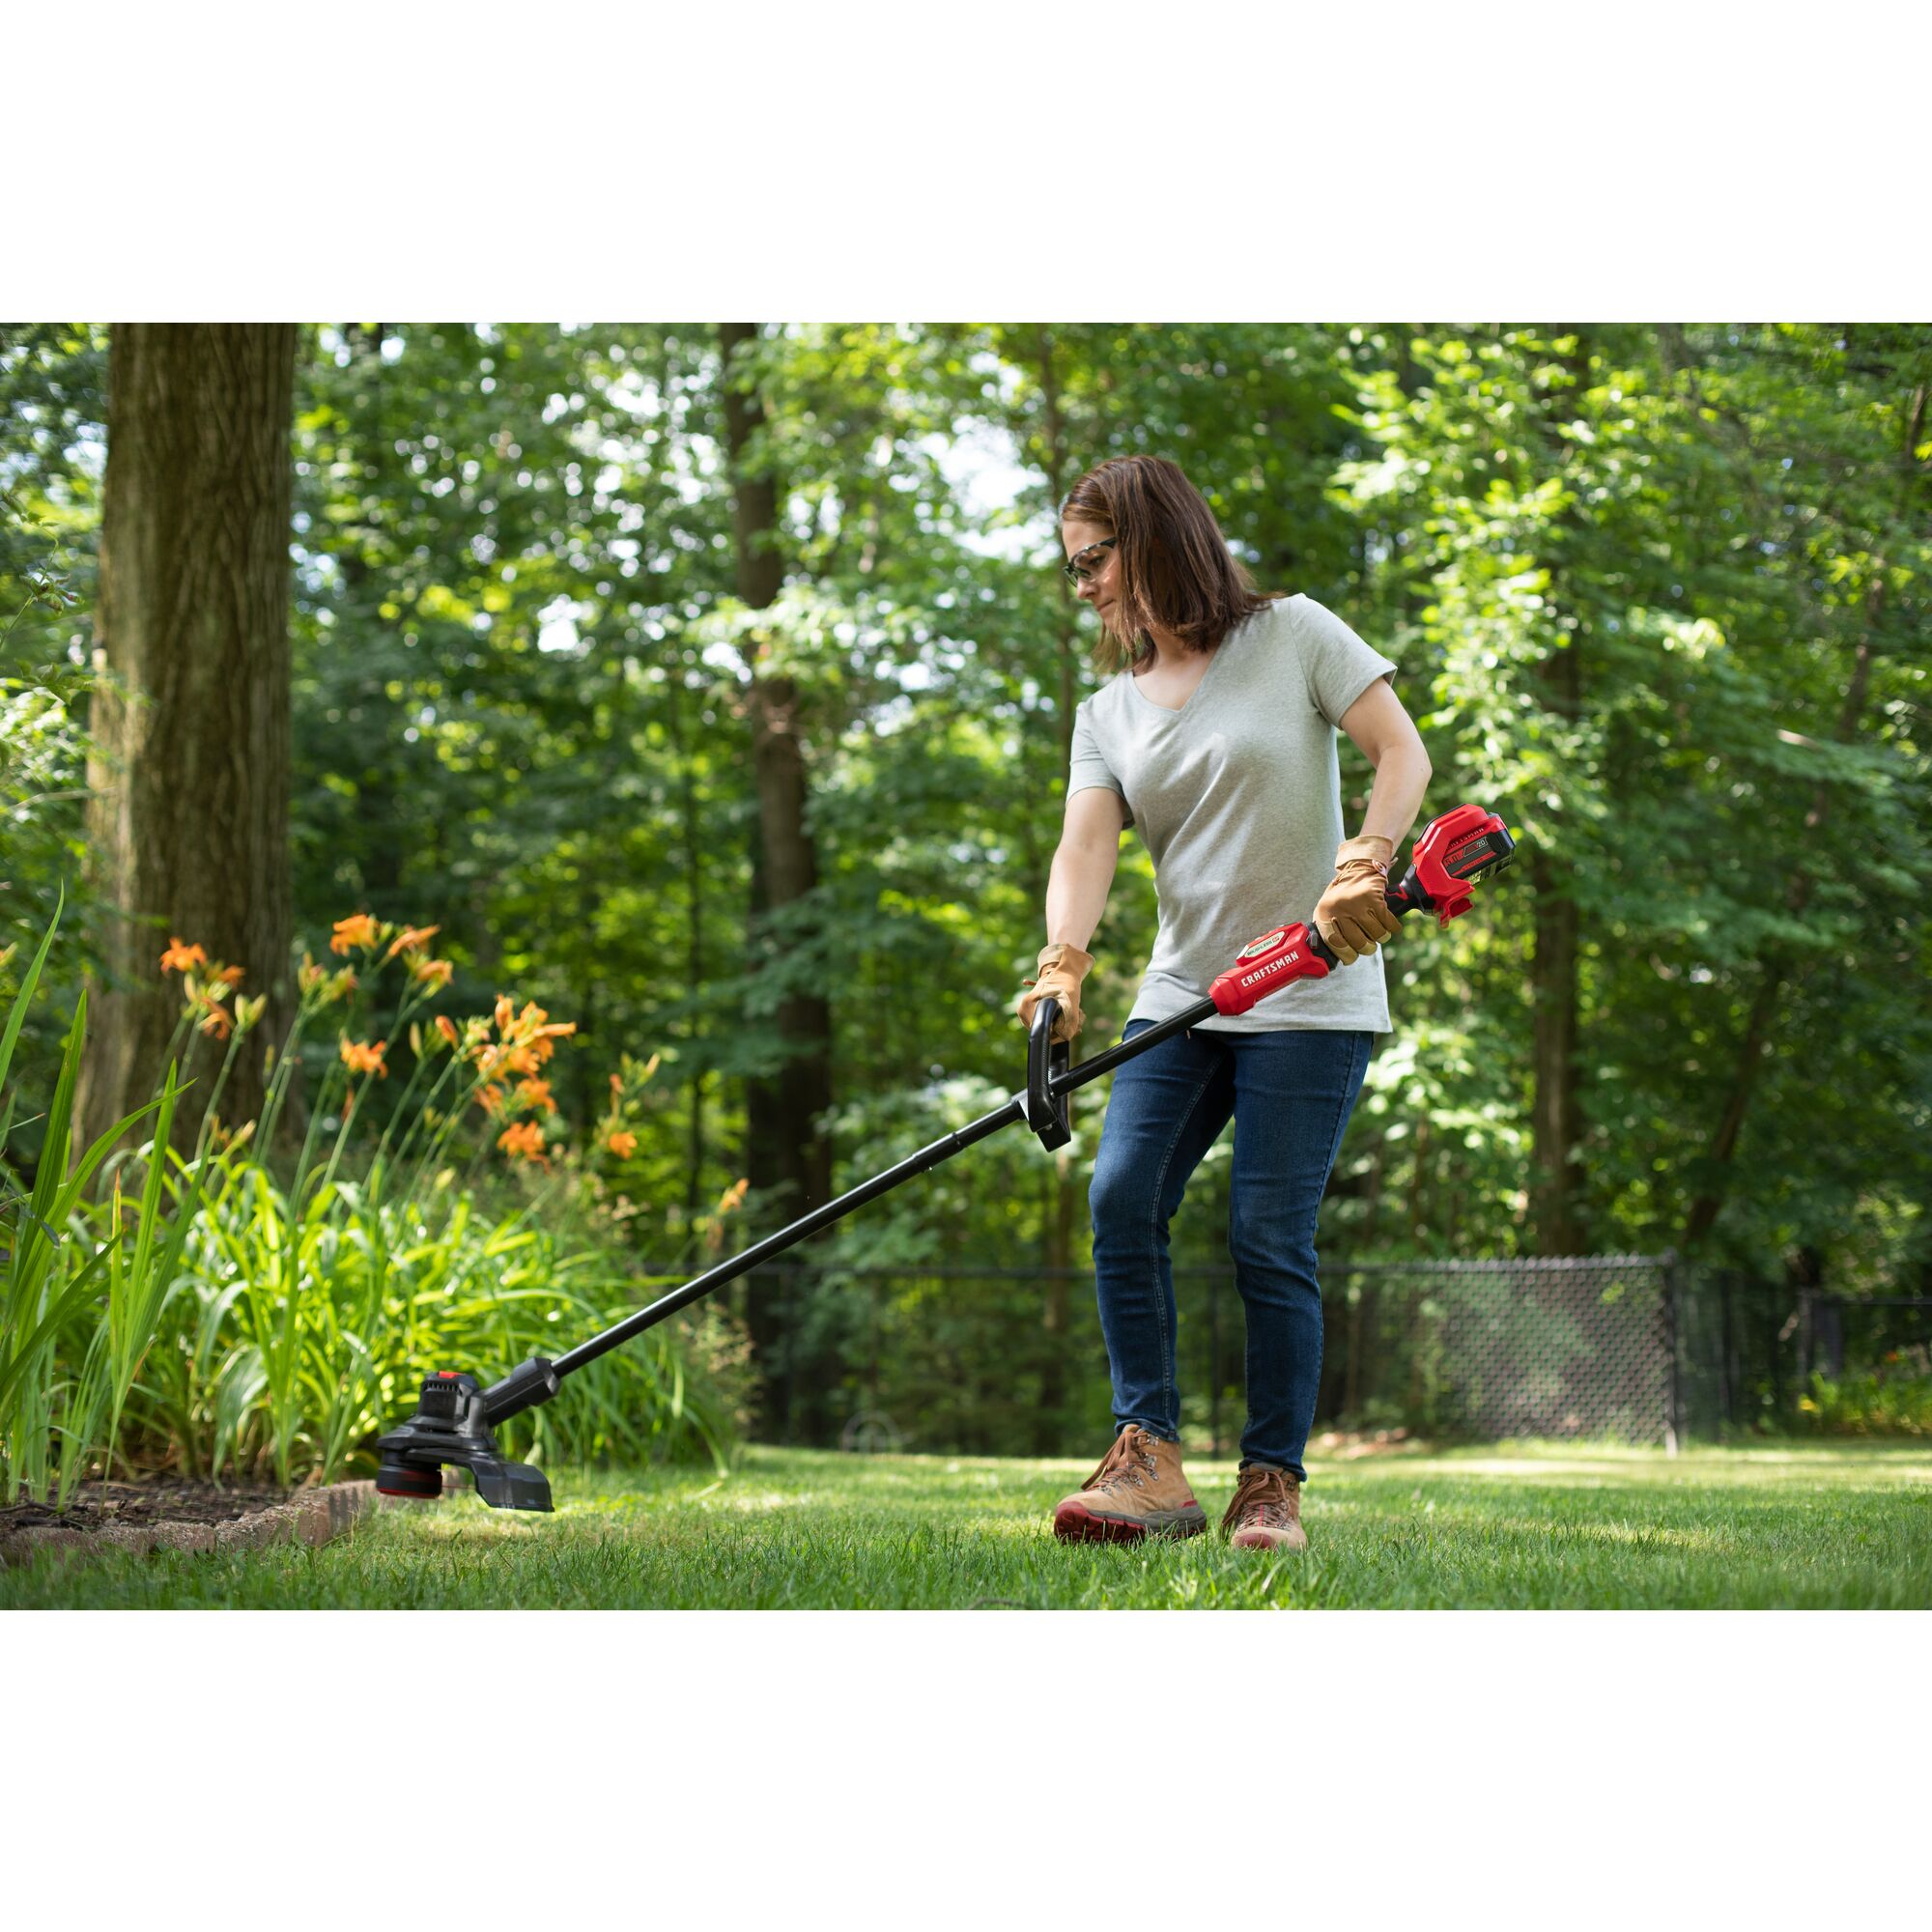 CRAFTSMAN V20 BRUSHLES PR String Trimmer trimming around flowerbed with trees in background